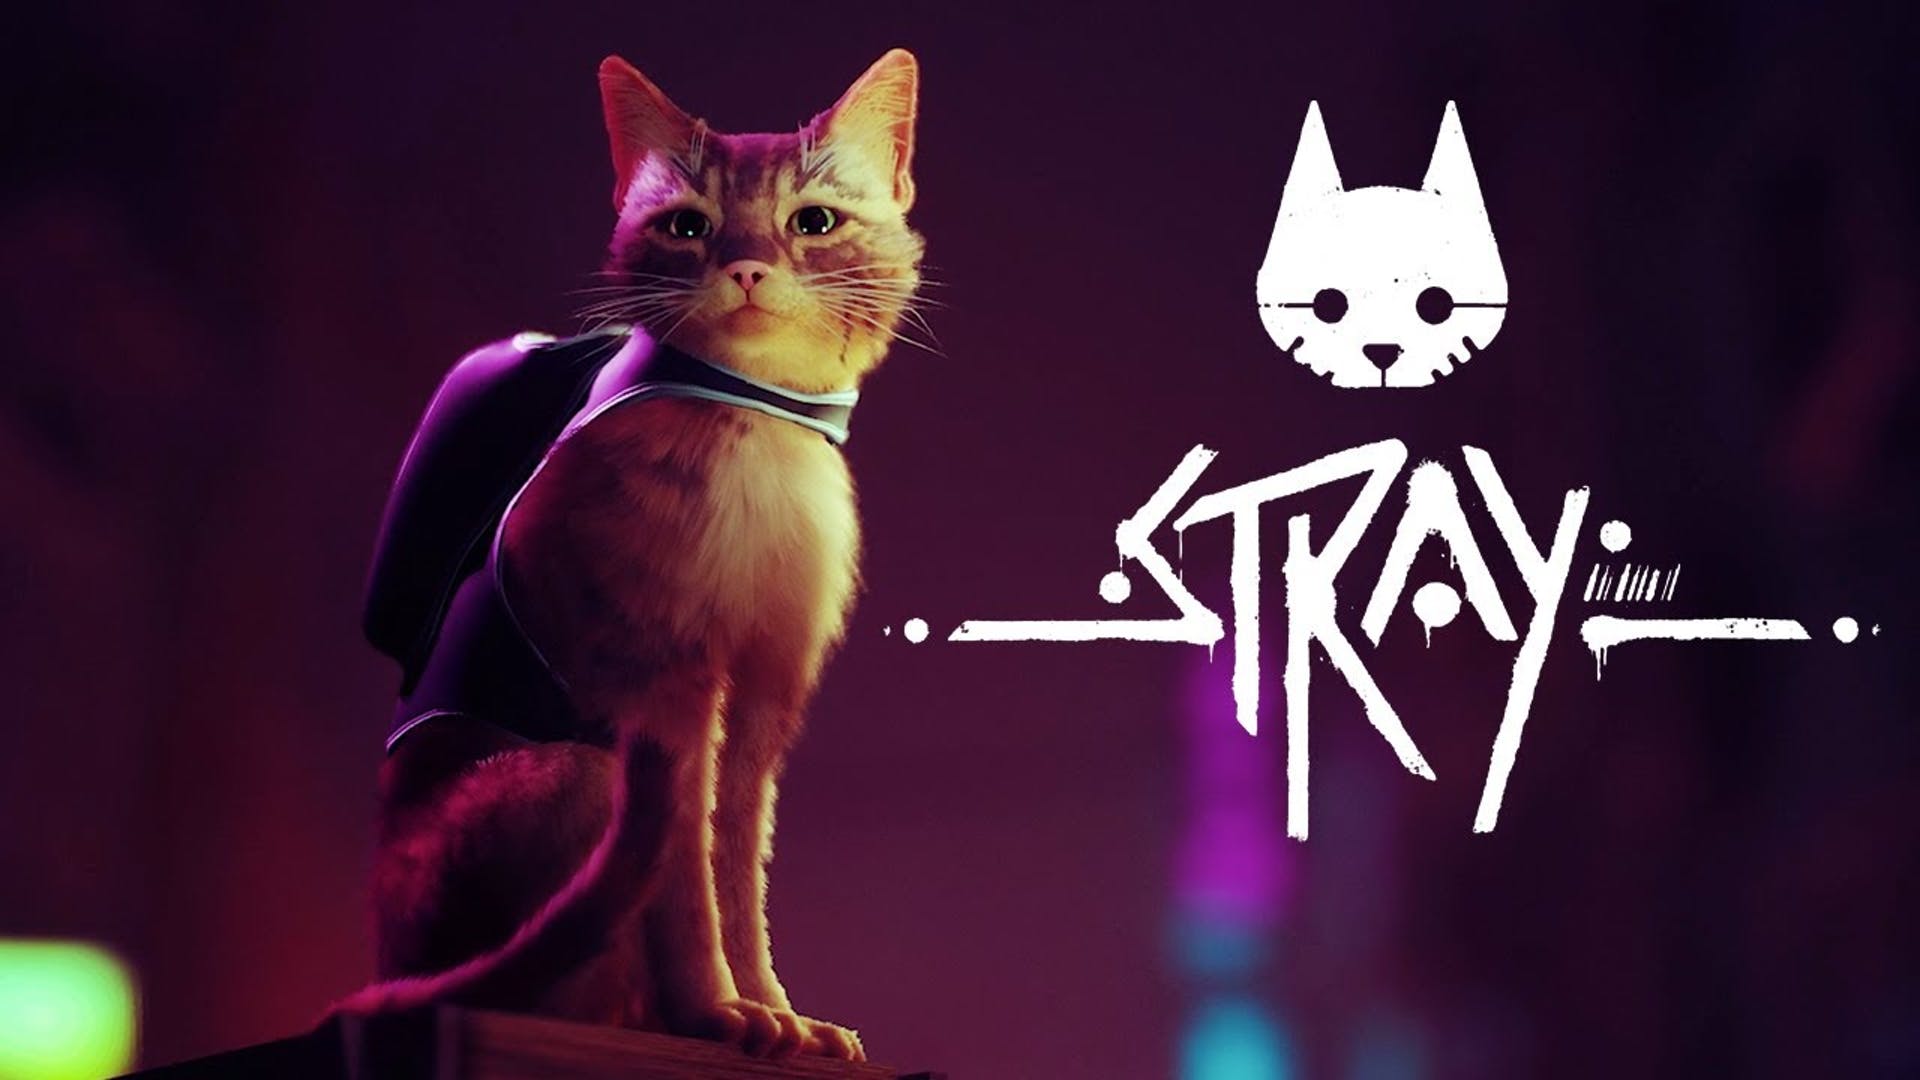 Stray Cat Overrun! Wallpapers